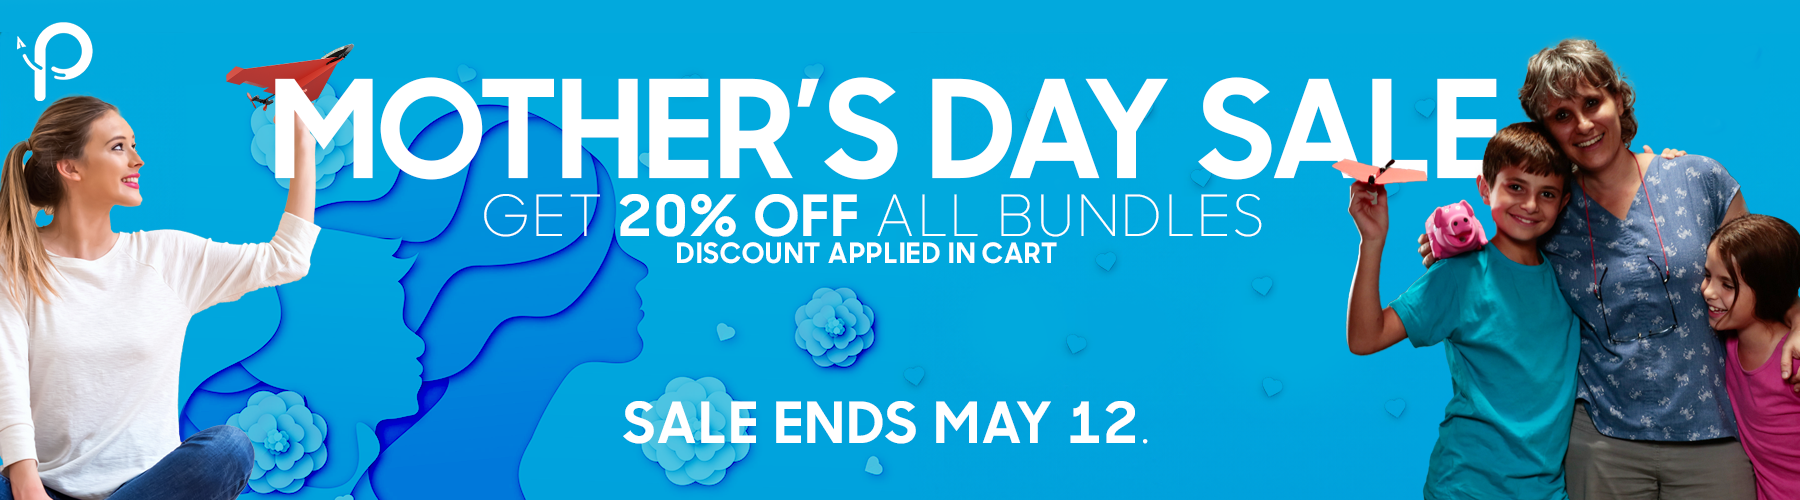 Mother's Day Sale | POWERUP